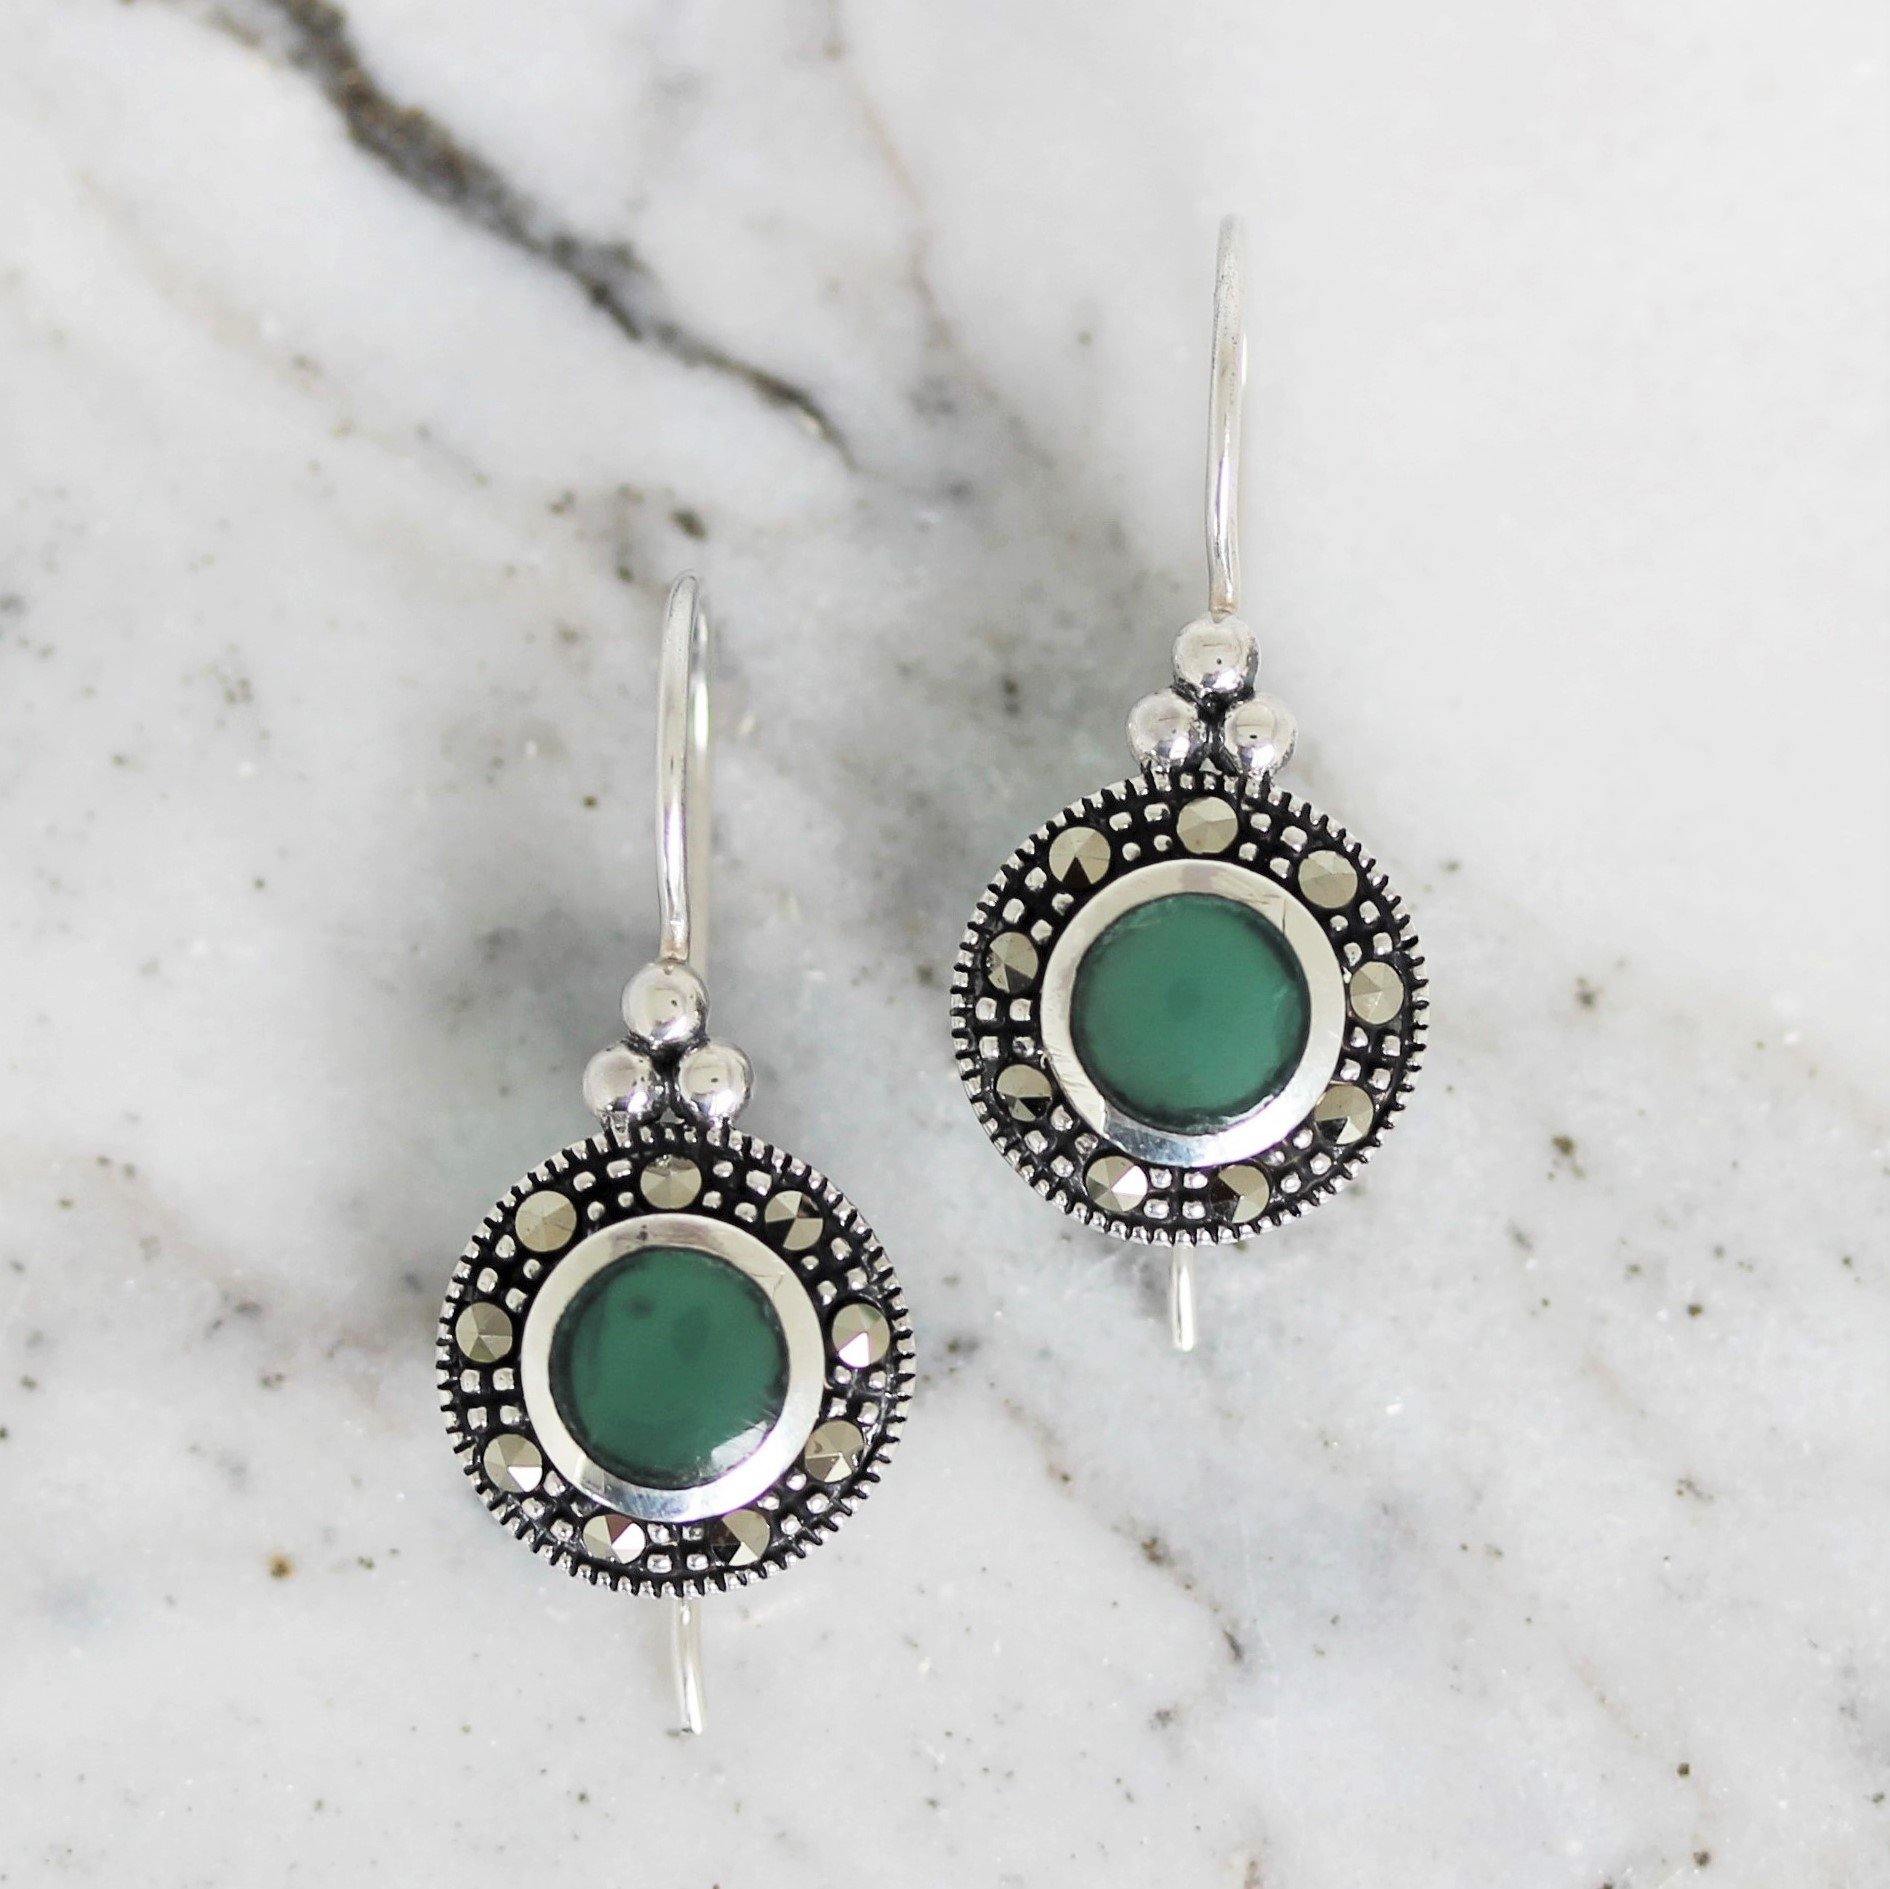 Sterling Silver Marcasite & Green Agate French Hook Drop Earrings - STERLING SILVER DESIGNS